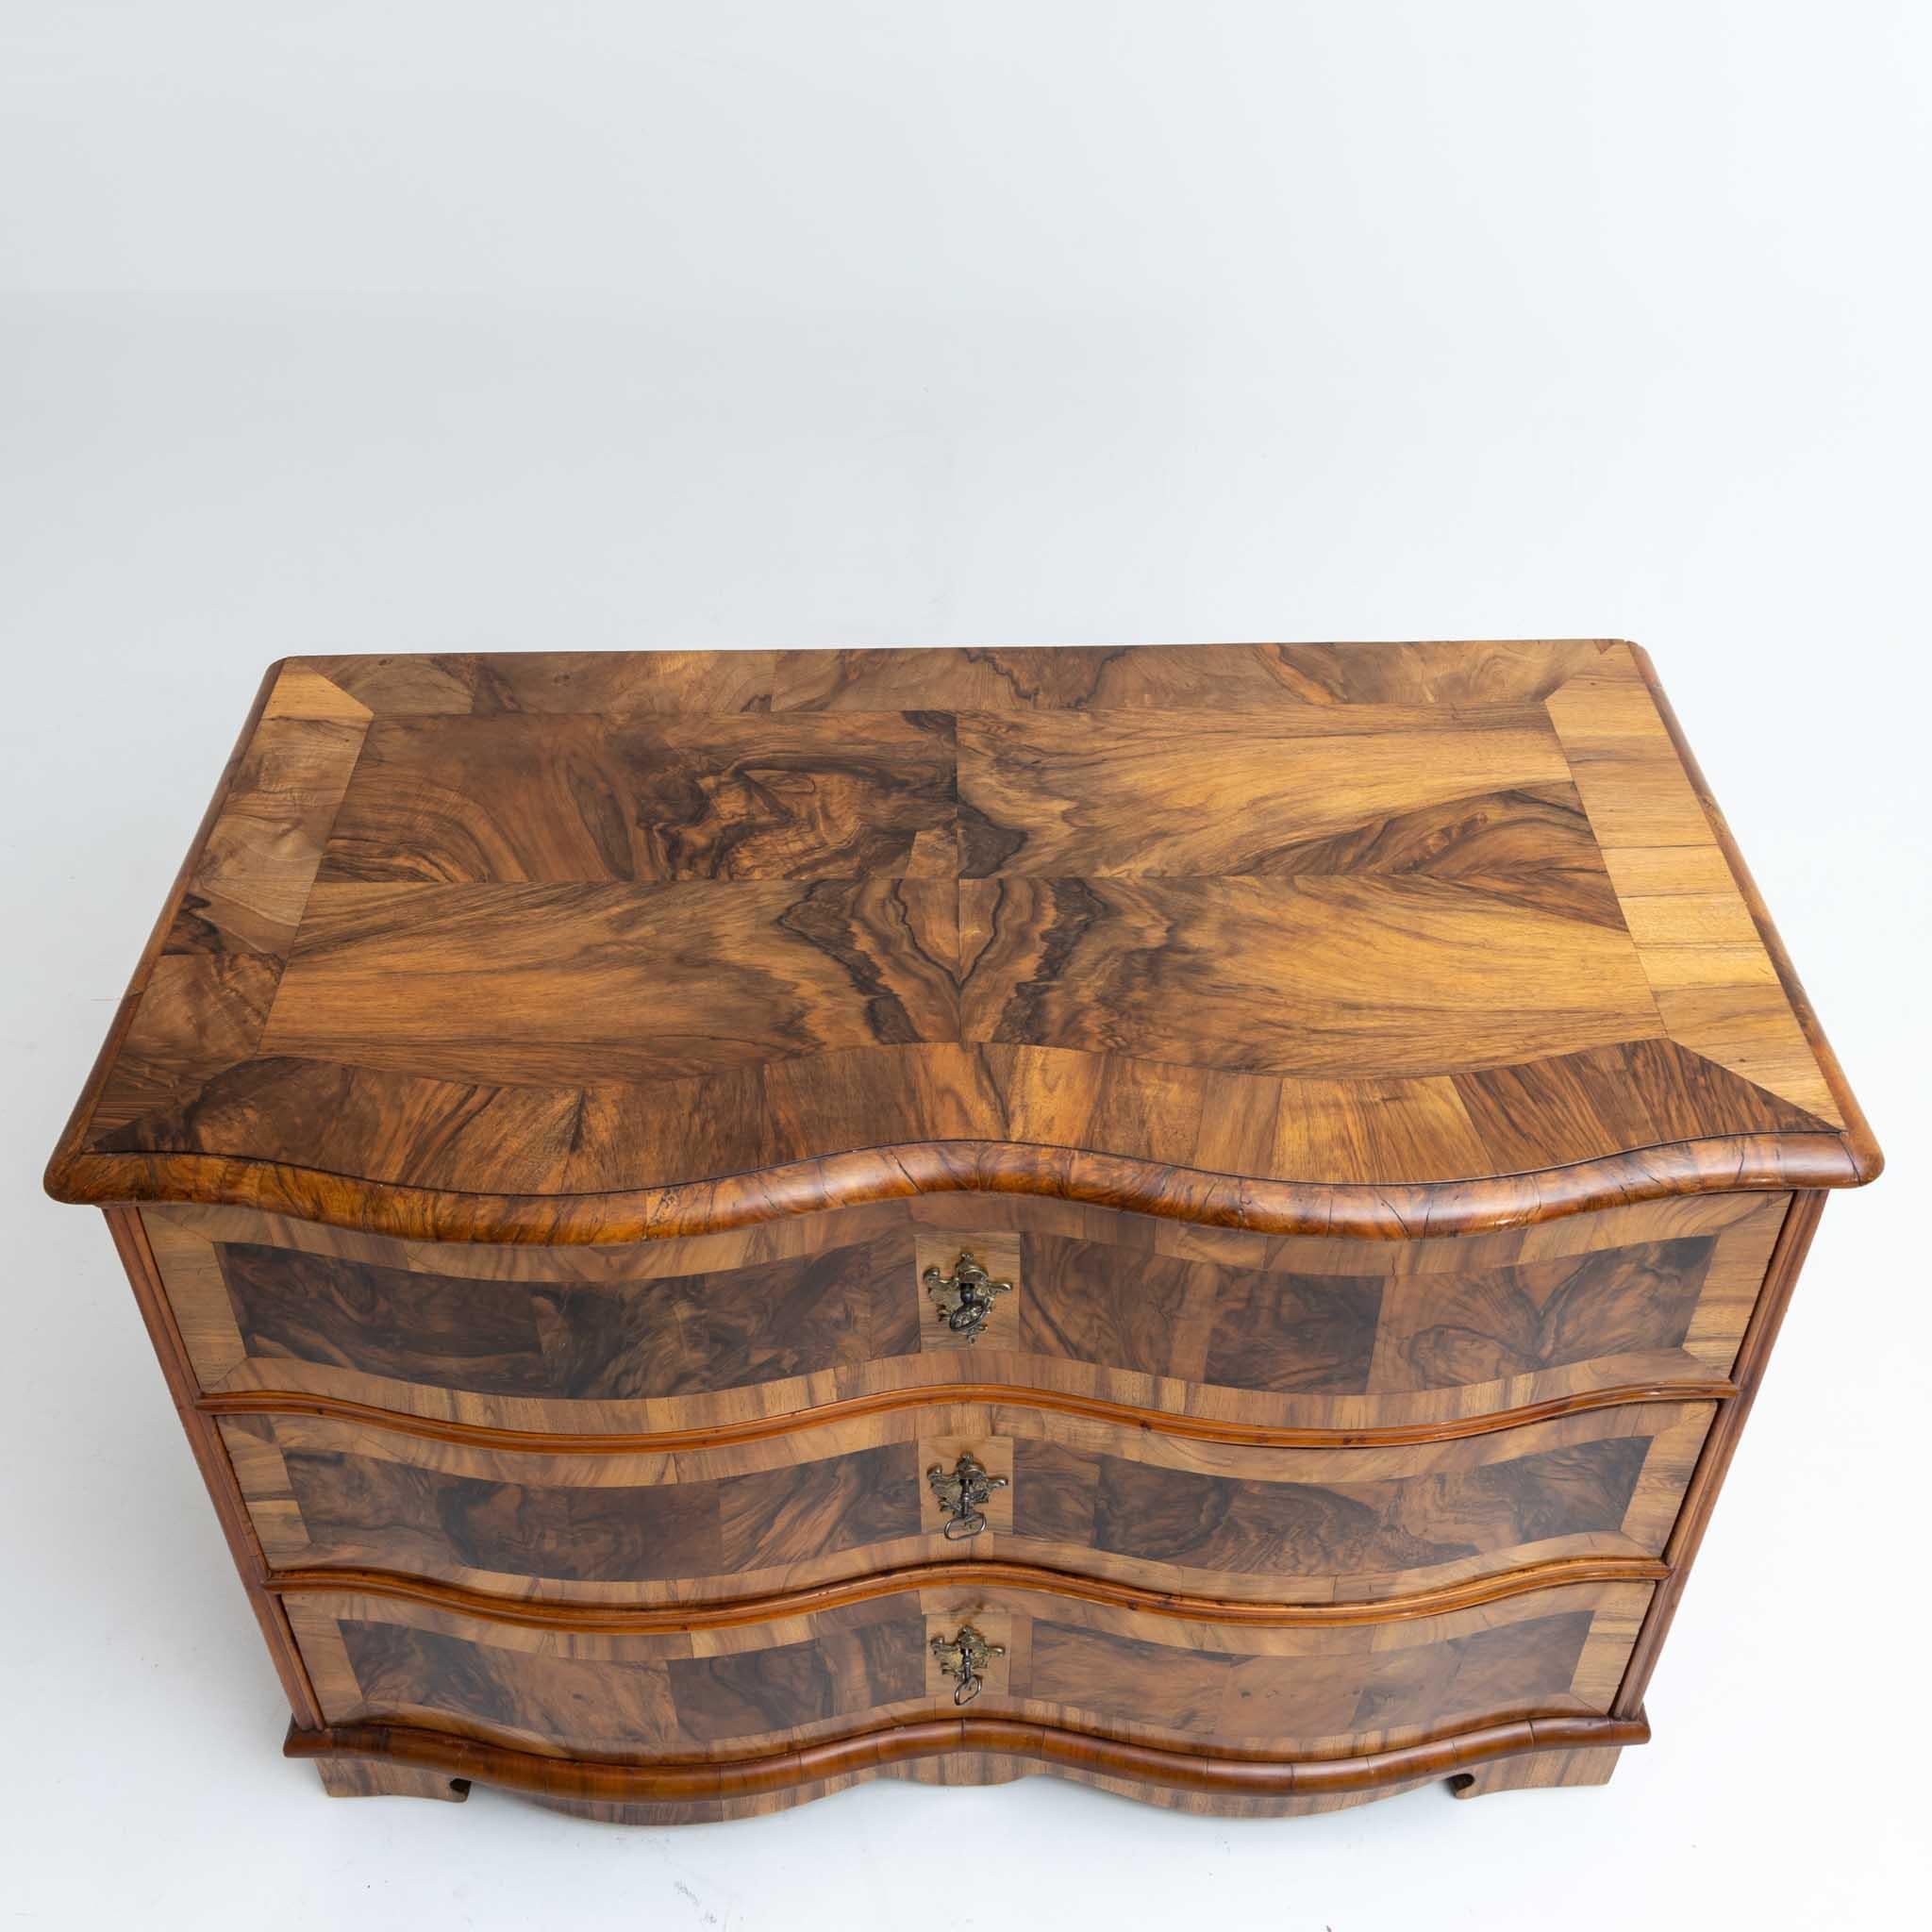 Baroque Chest of Drawers, hand-polished Walnut Veneer, Germany, Mid-18th Century 2